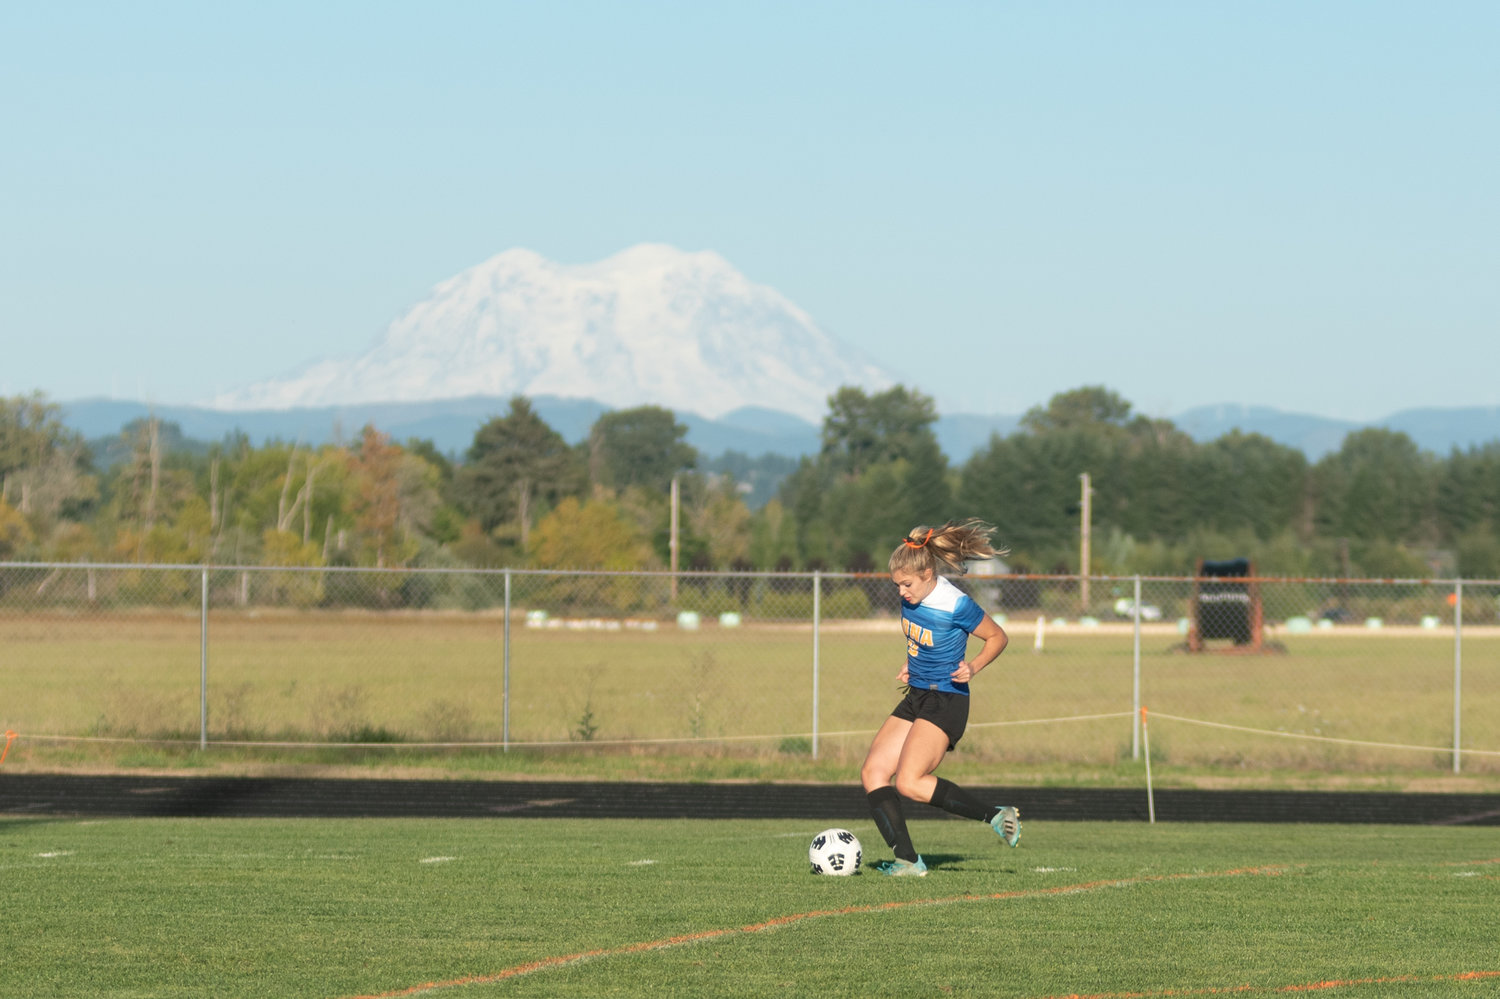 An Adna player shoots a ball toward the net during a drill pregame against Onalaska in the shadow of Mount Saint Helens.